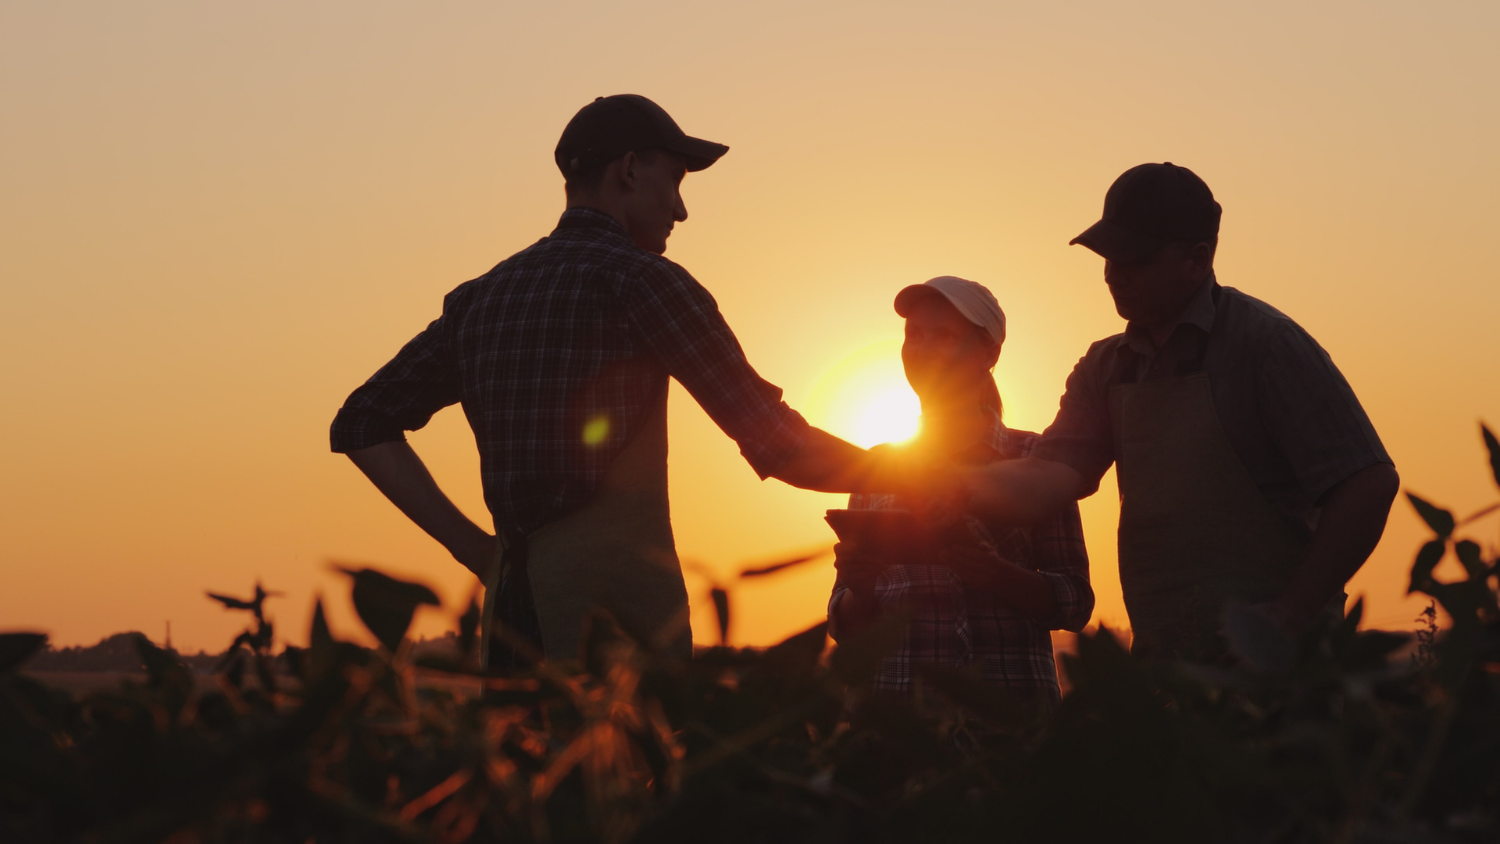 farmers shaking hands in a field at sunset